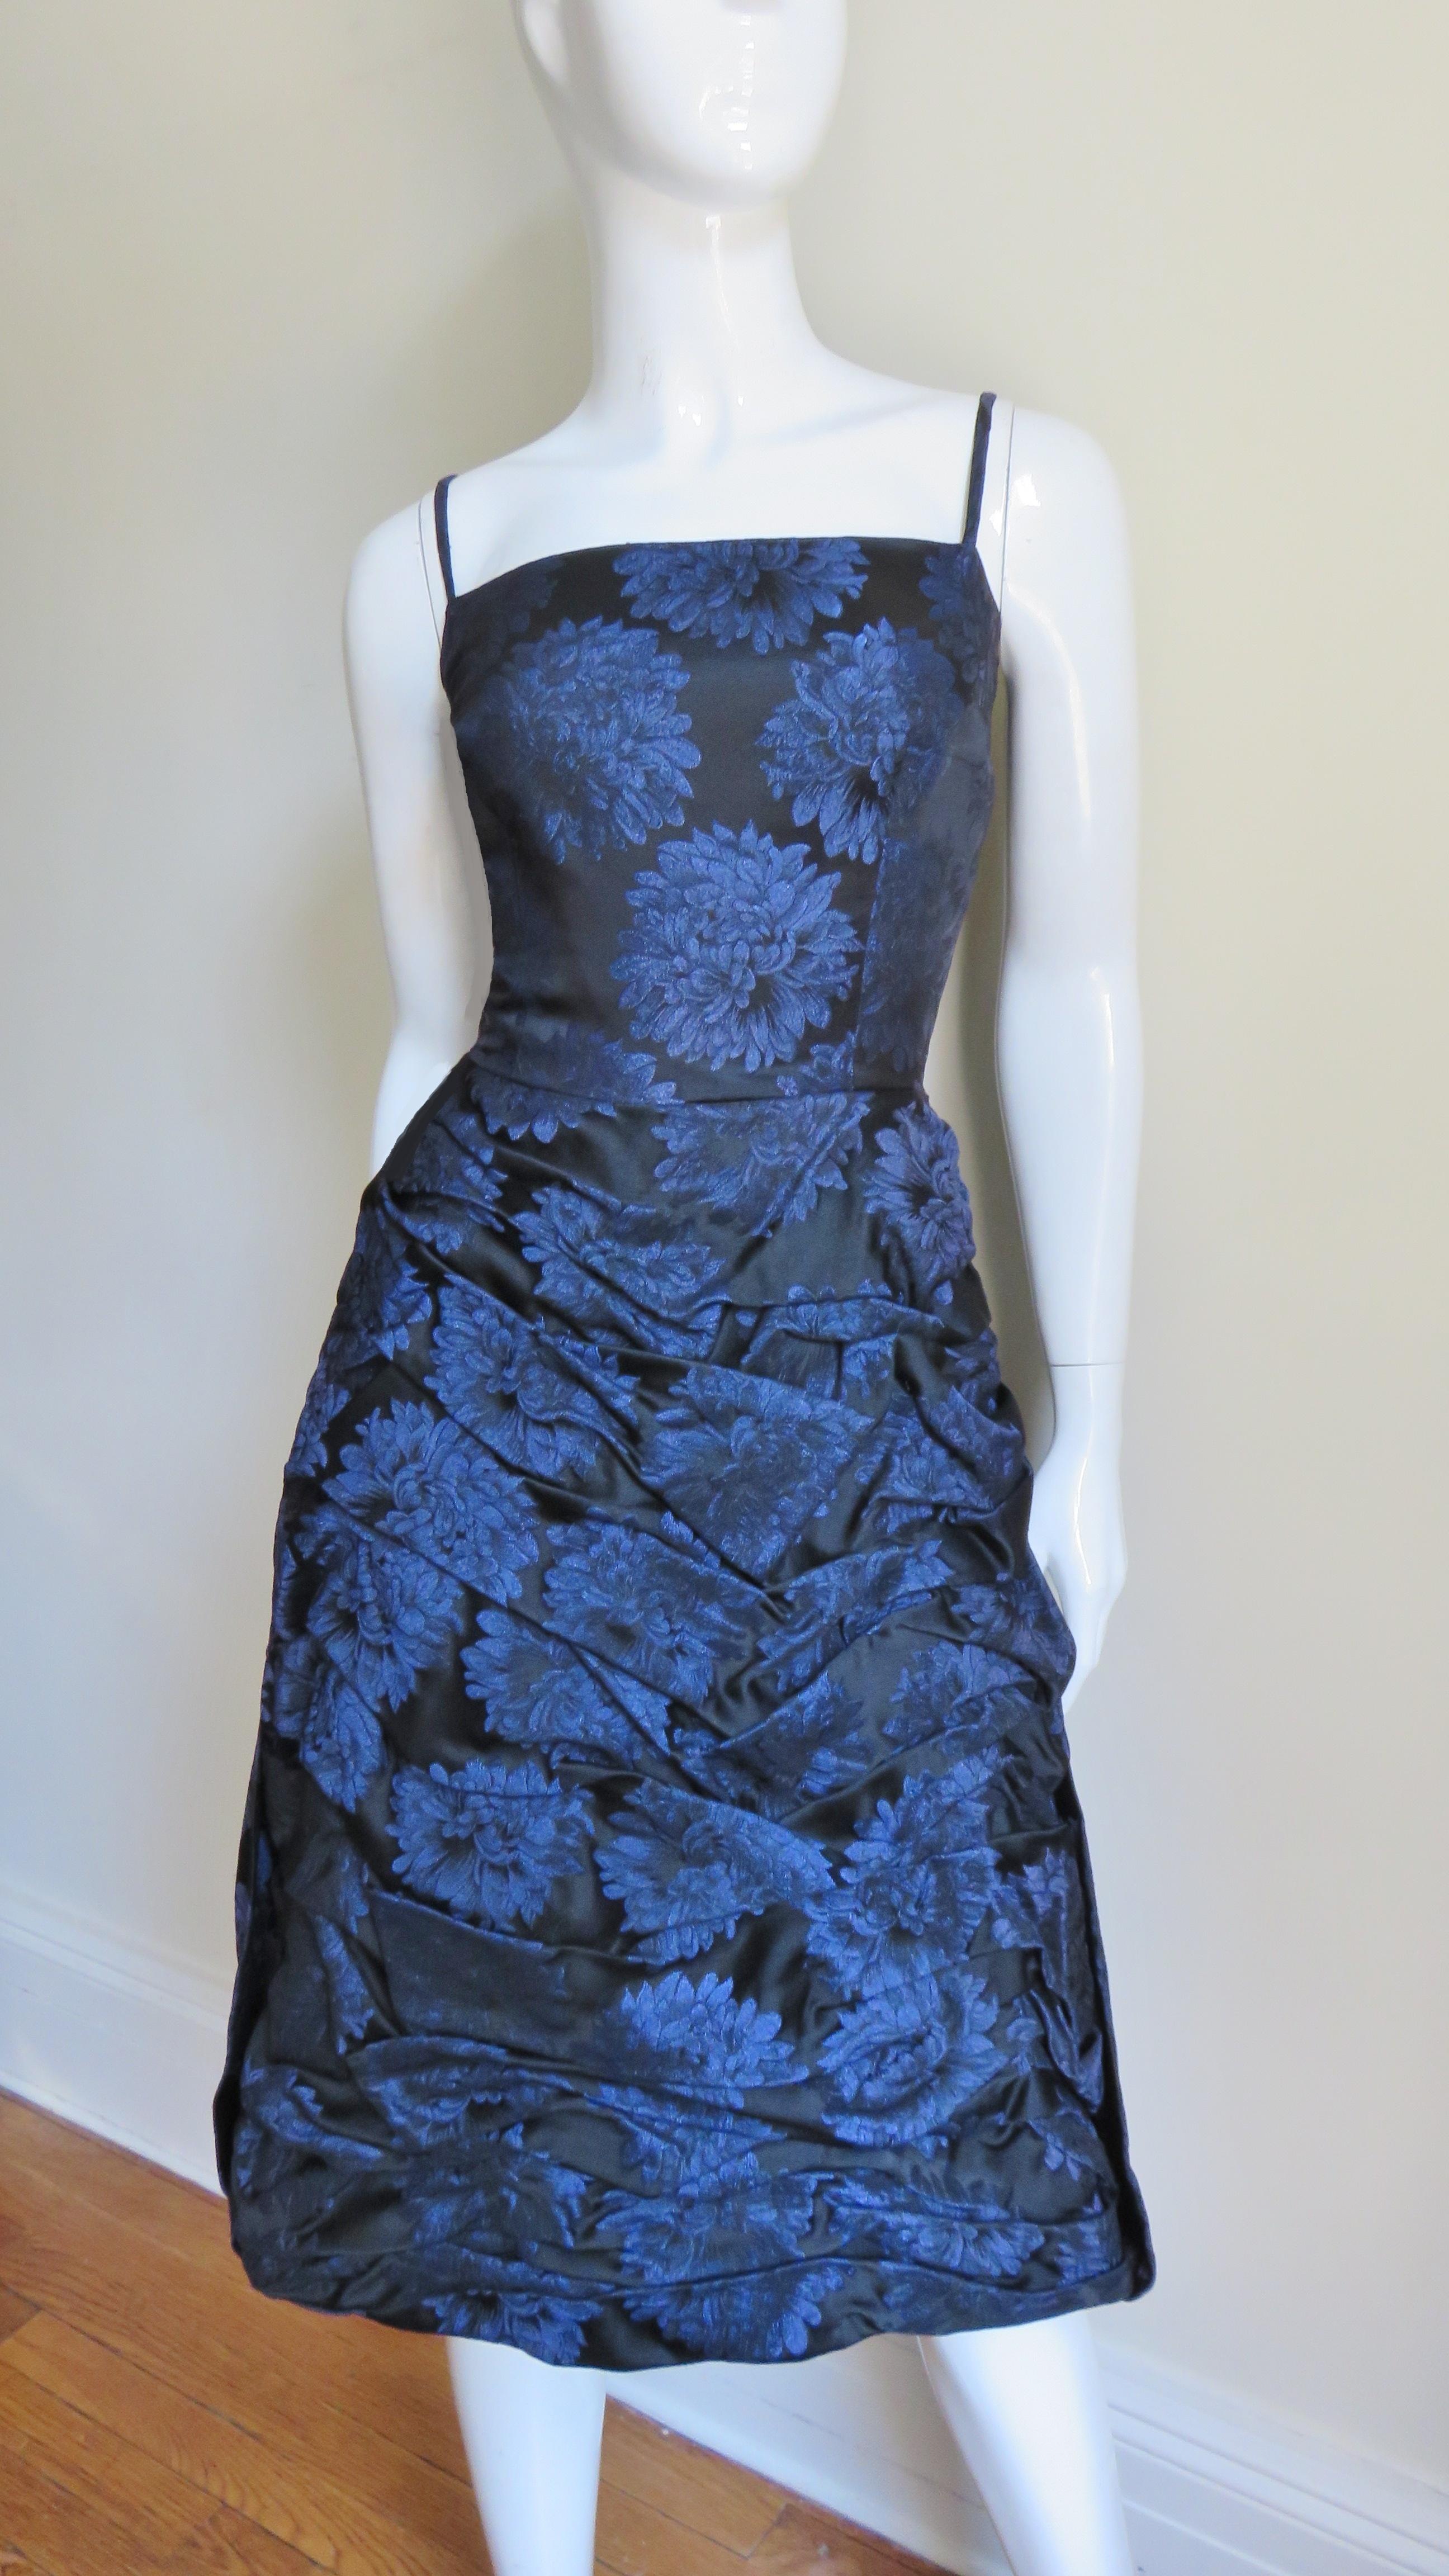 A fabulous blue on black chrysanthemum pattern silk damask dress by Sher Lee.  It has a fitted bodice with spaghetti straps and an incredible ruched skirt.  The back has a waterfall drape from the waist to skirt hem.  It is fully lined in black silk